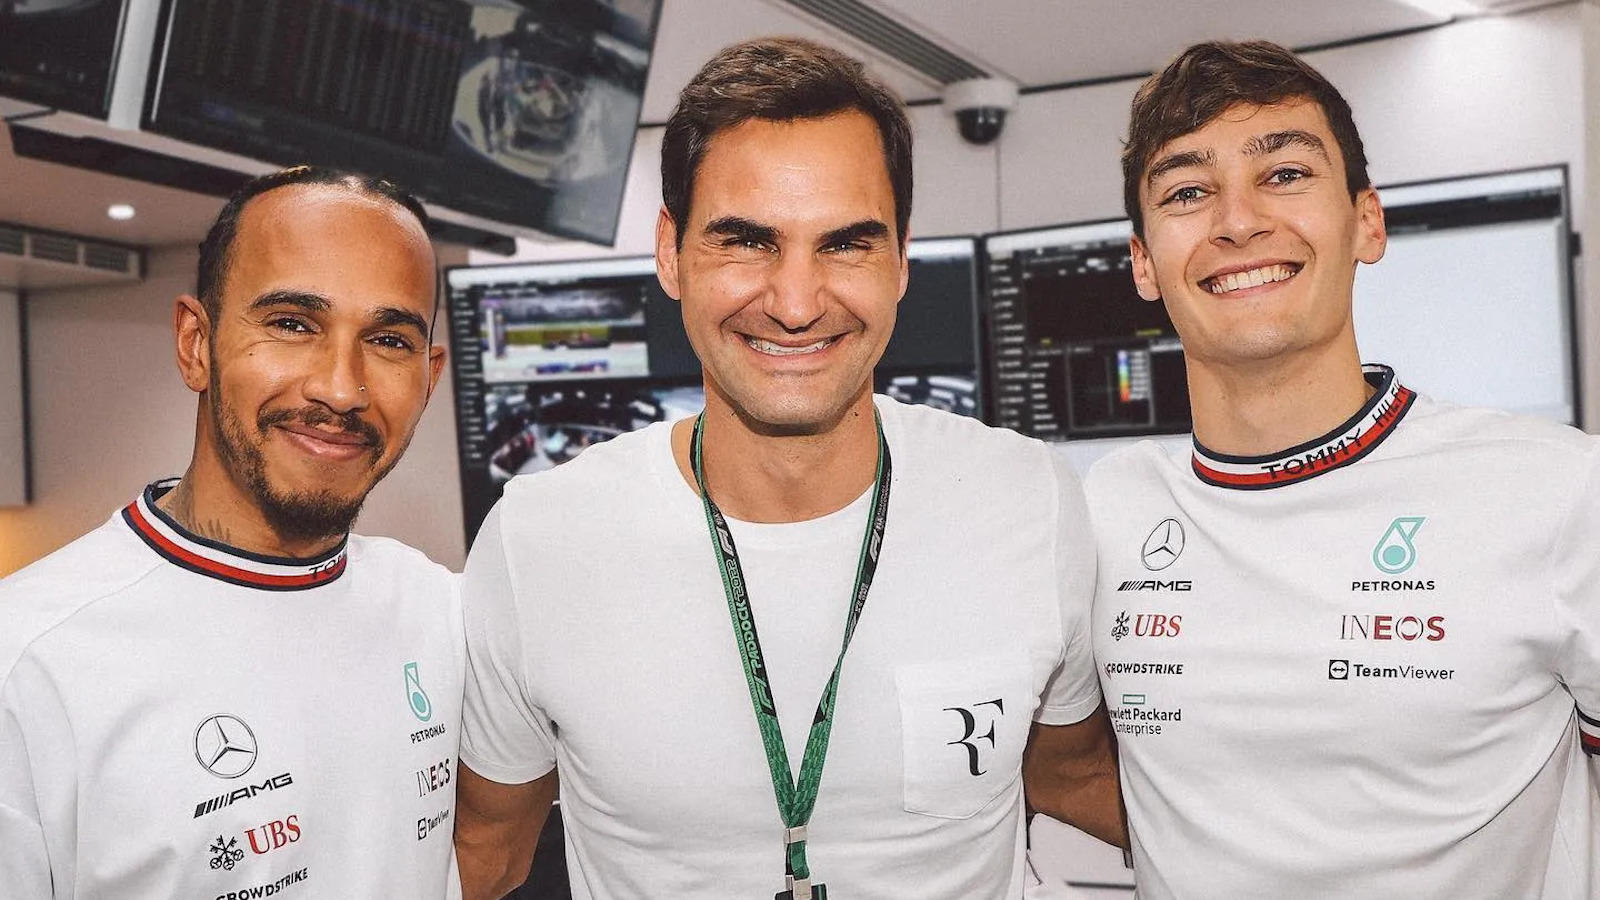 Roger Federer Spotted Wearing Rolex’s Hottest New Watch At Spanish Grand Prix